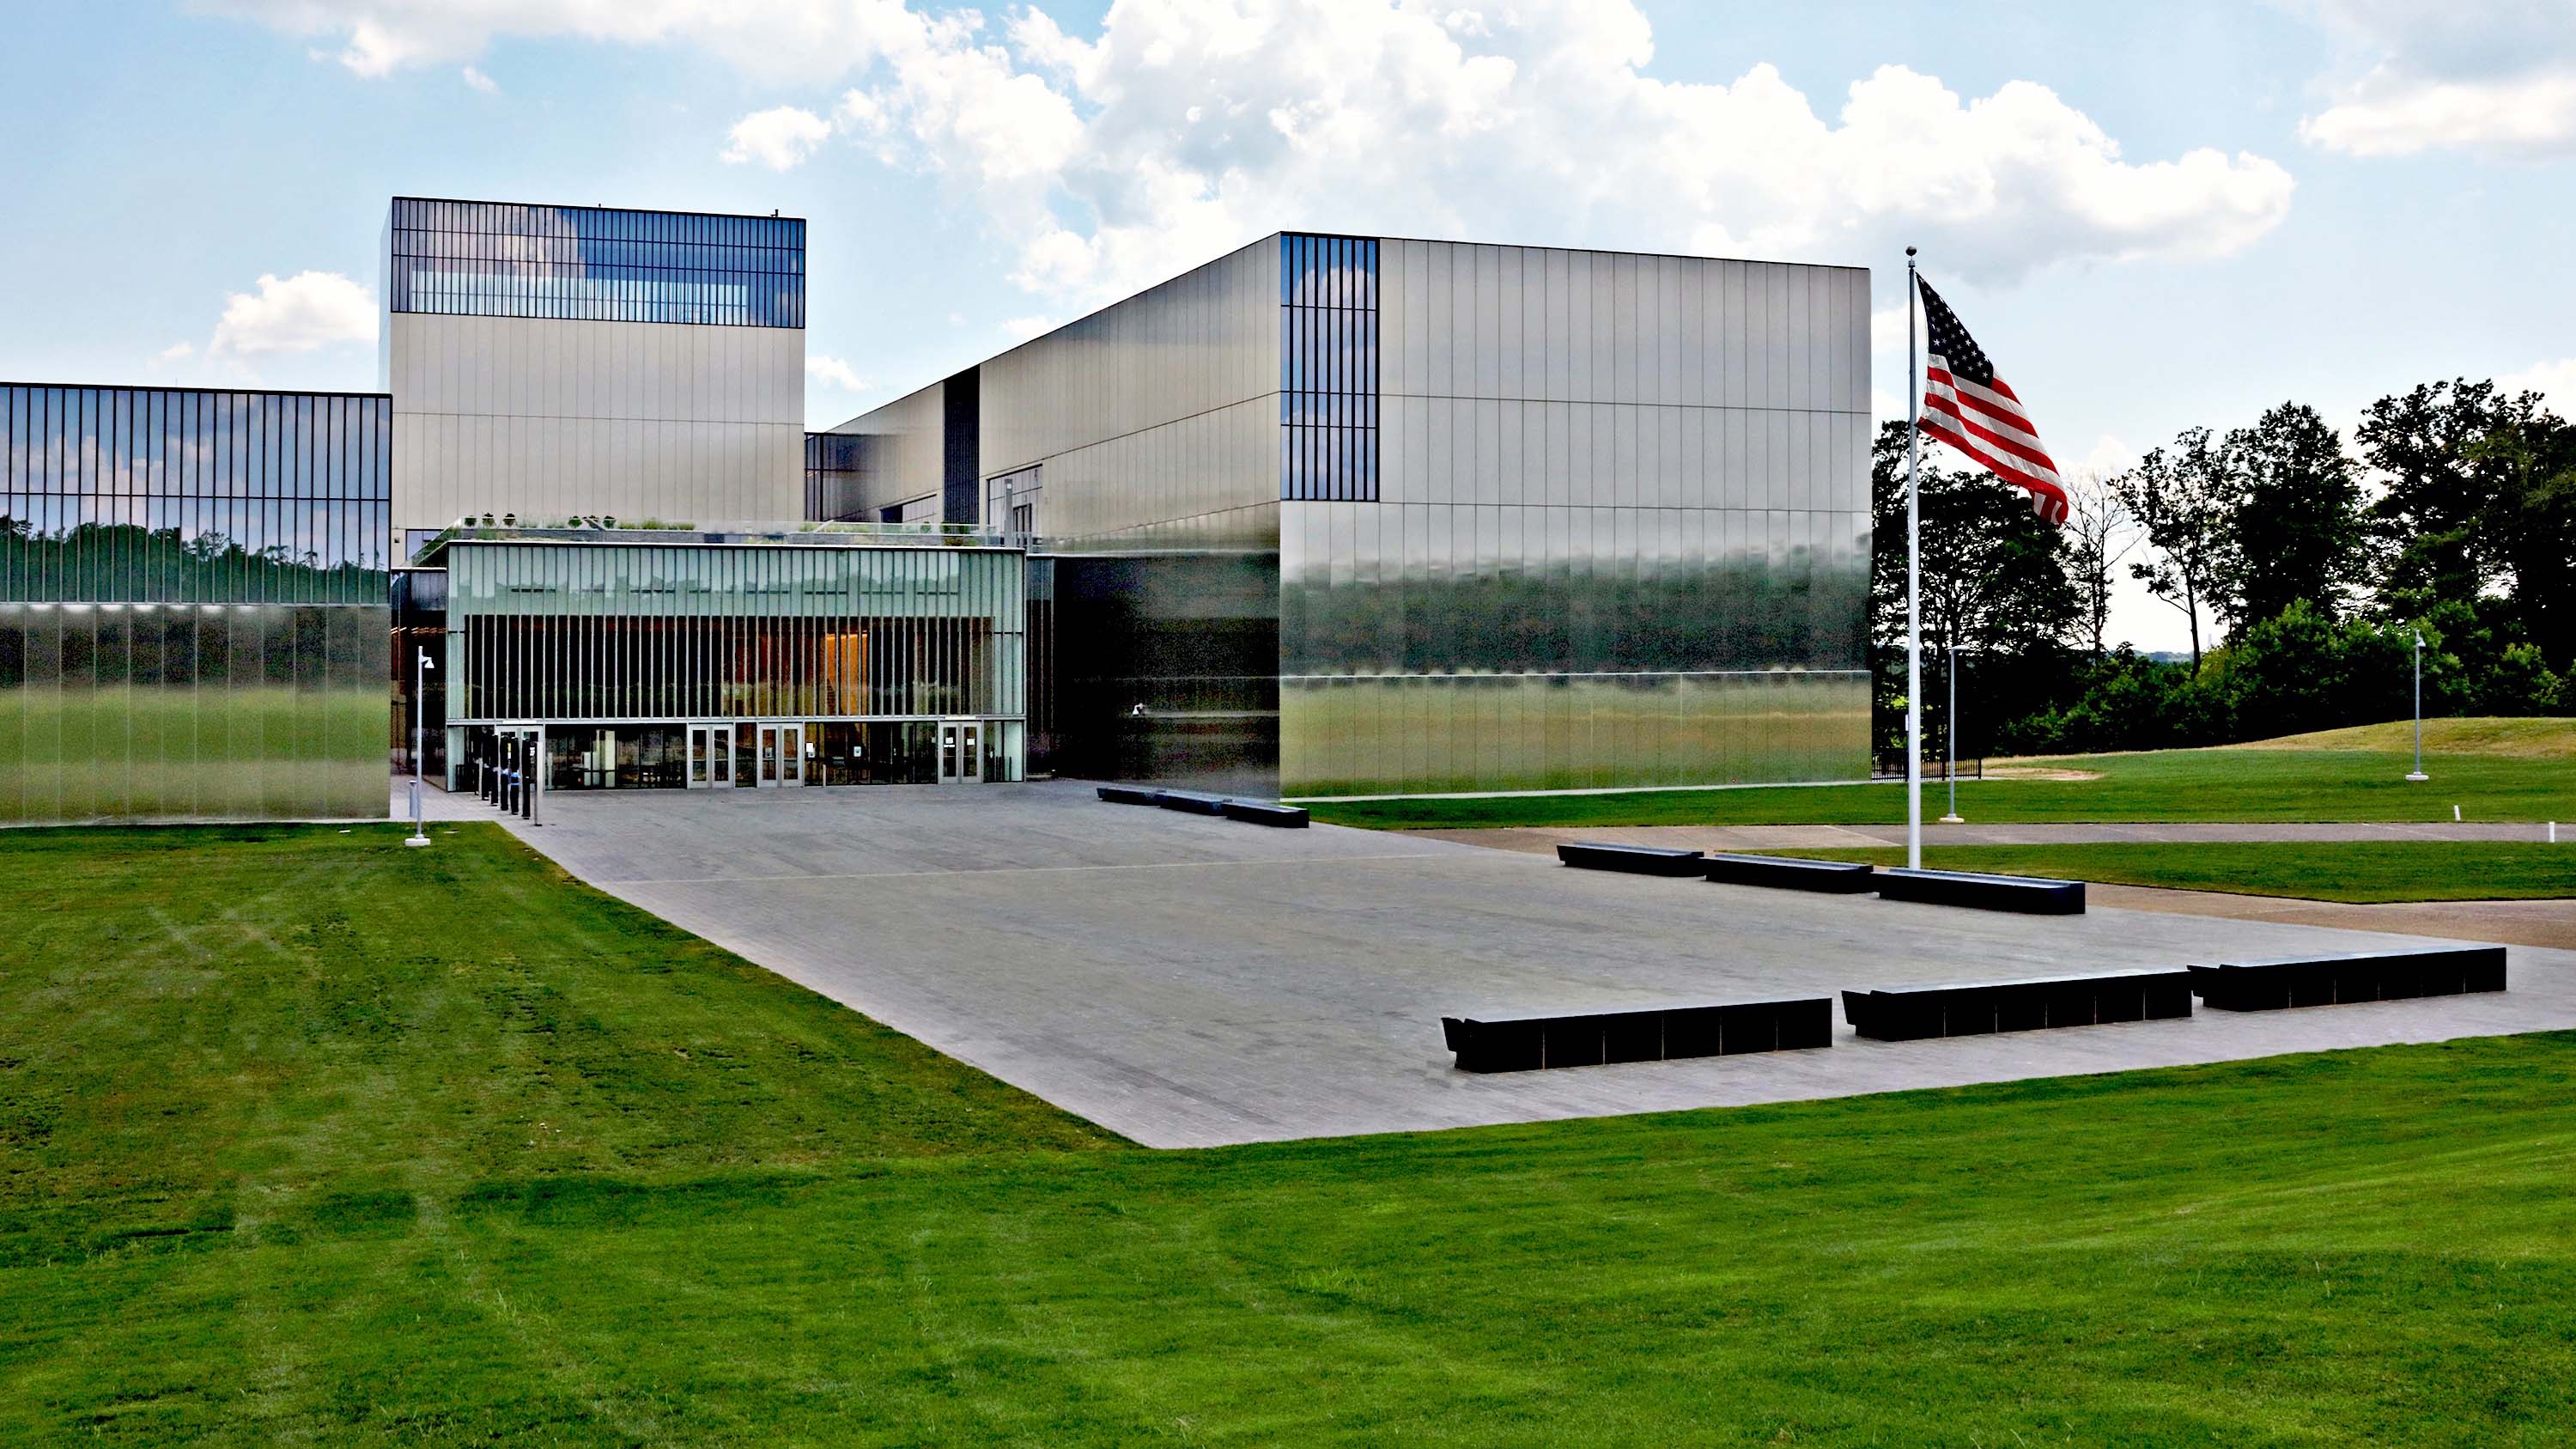 National Museum of the U.S. Army